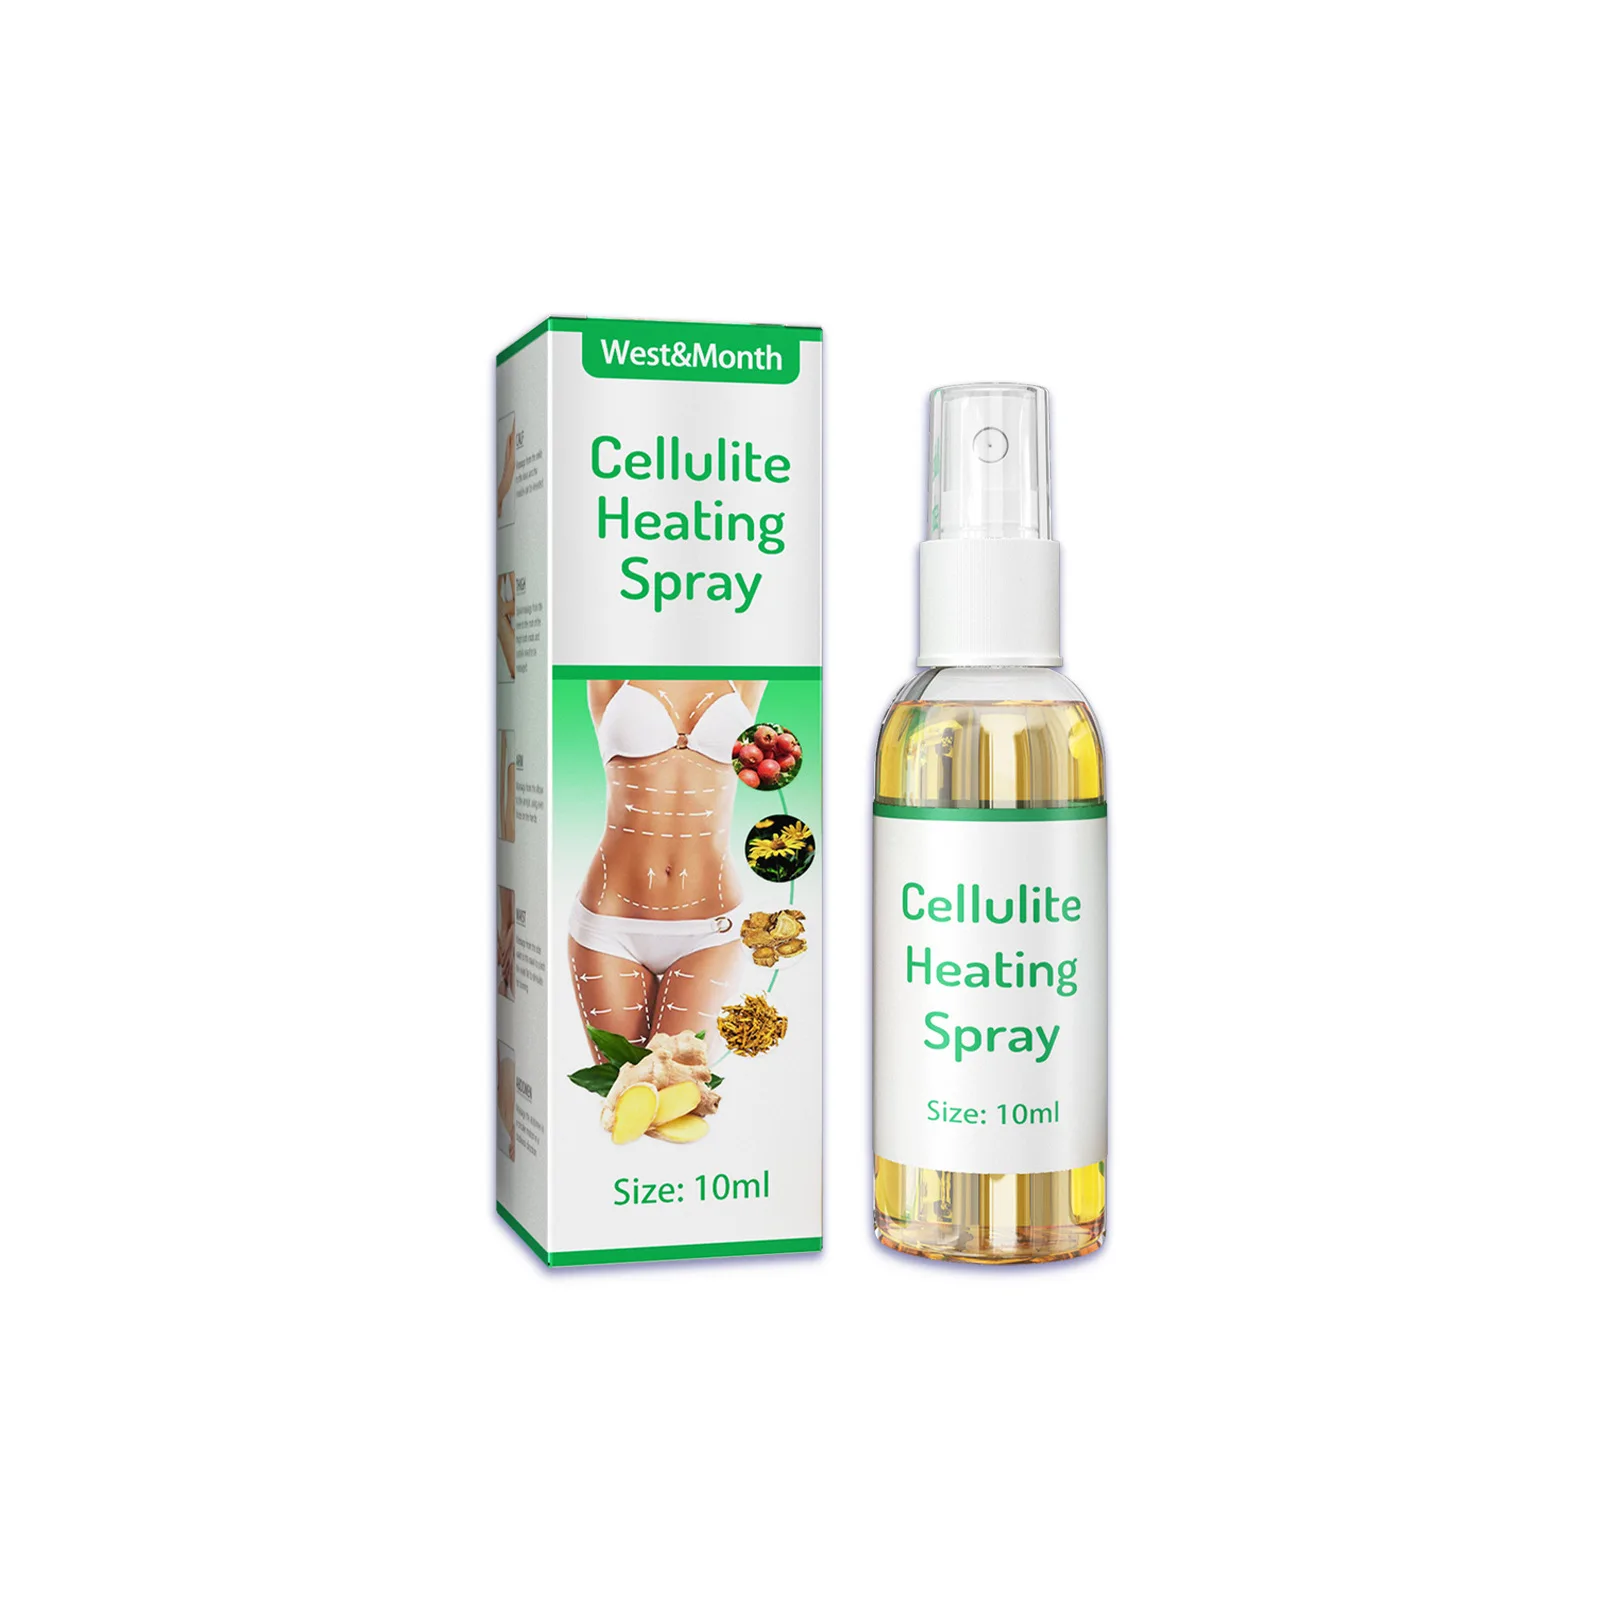 

West&Month Body sculpting spray shaping firming slender belly thigh slimming essential oil massage heating essence spray